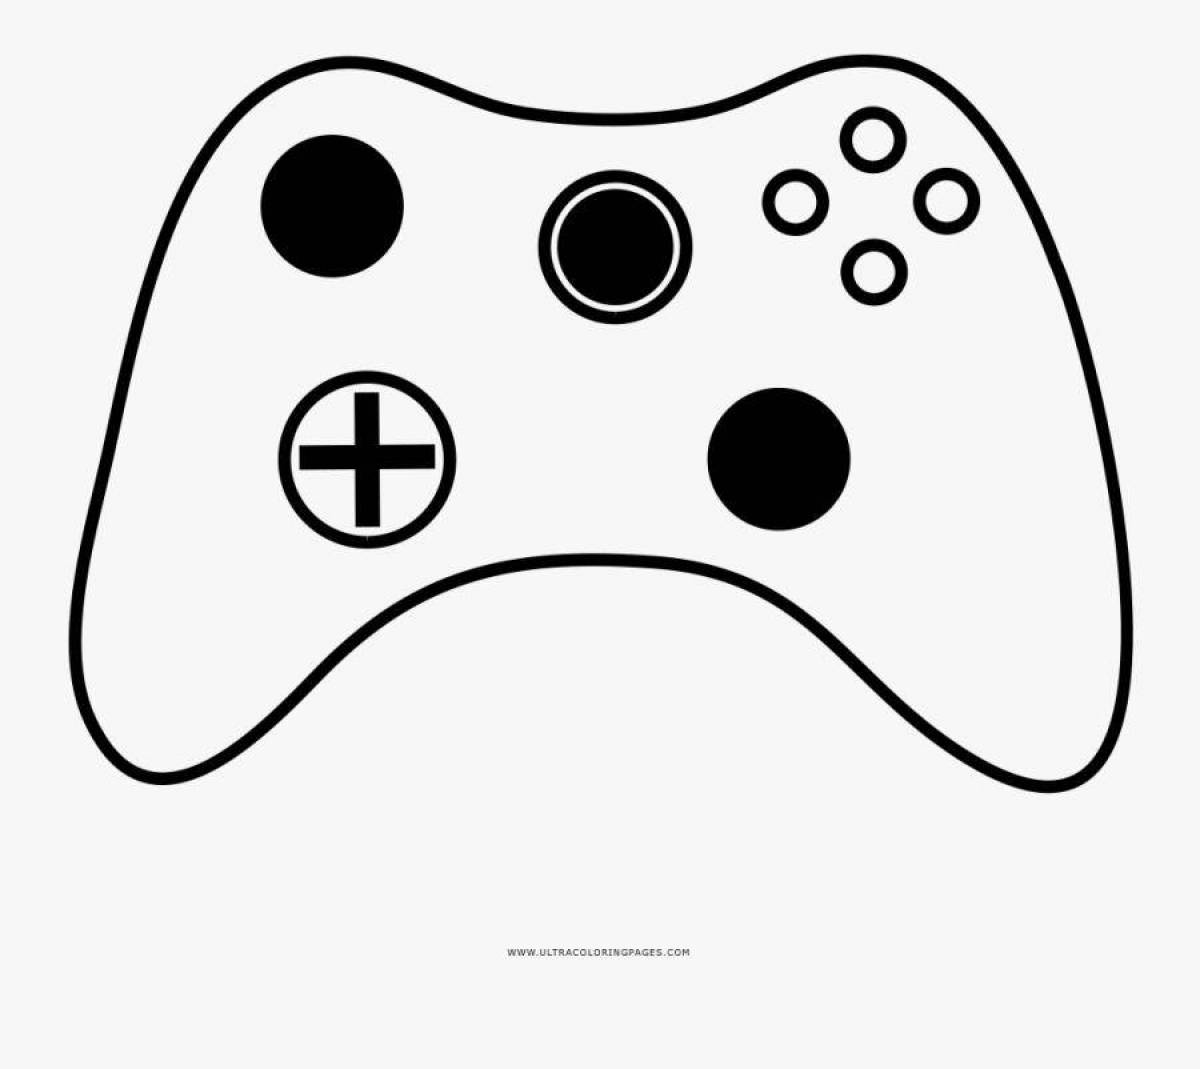 Playful gamepad coloring page